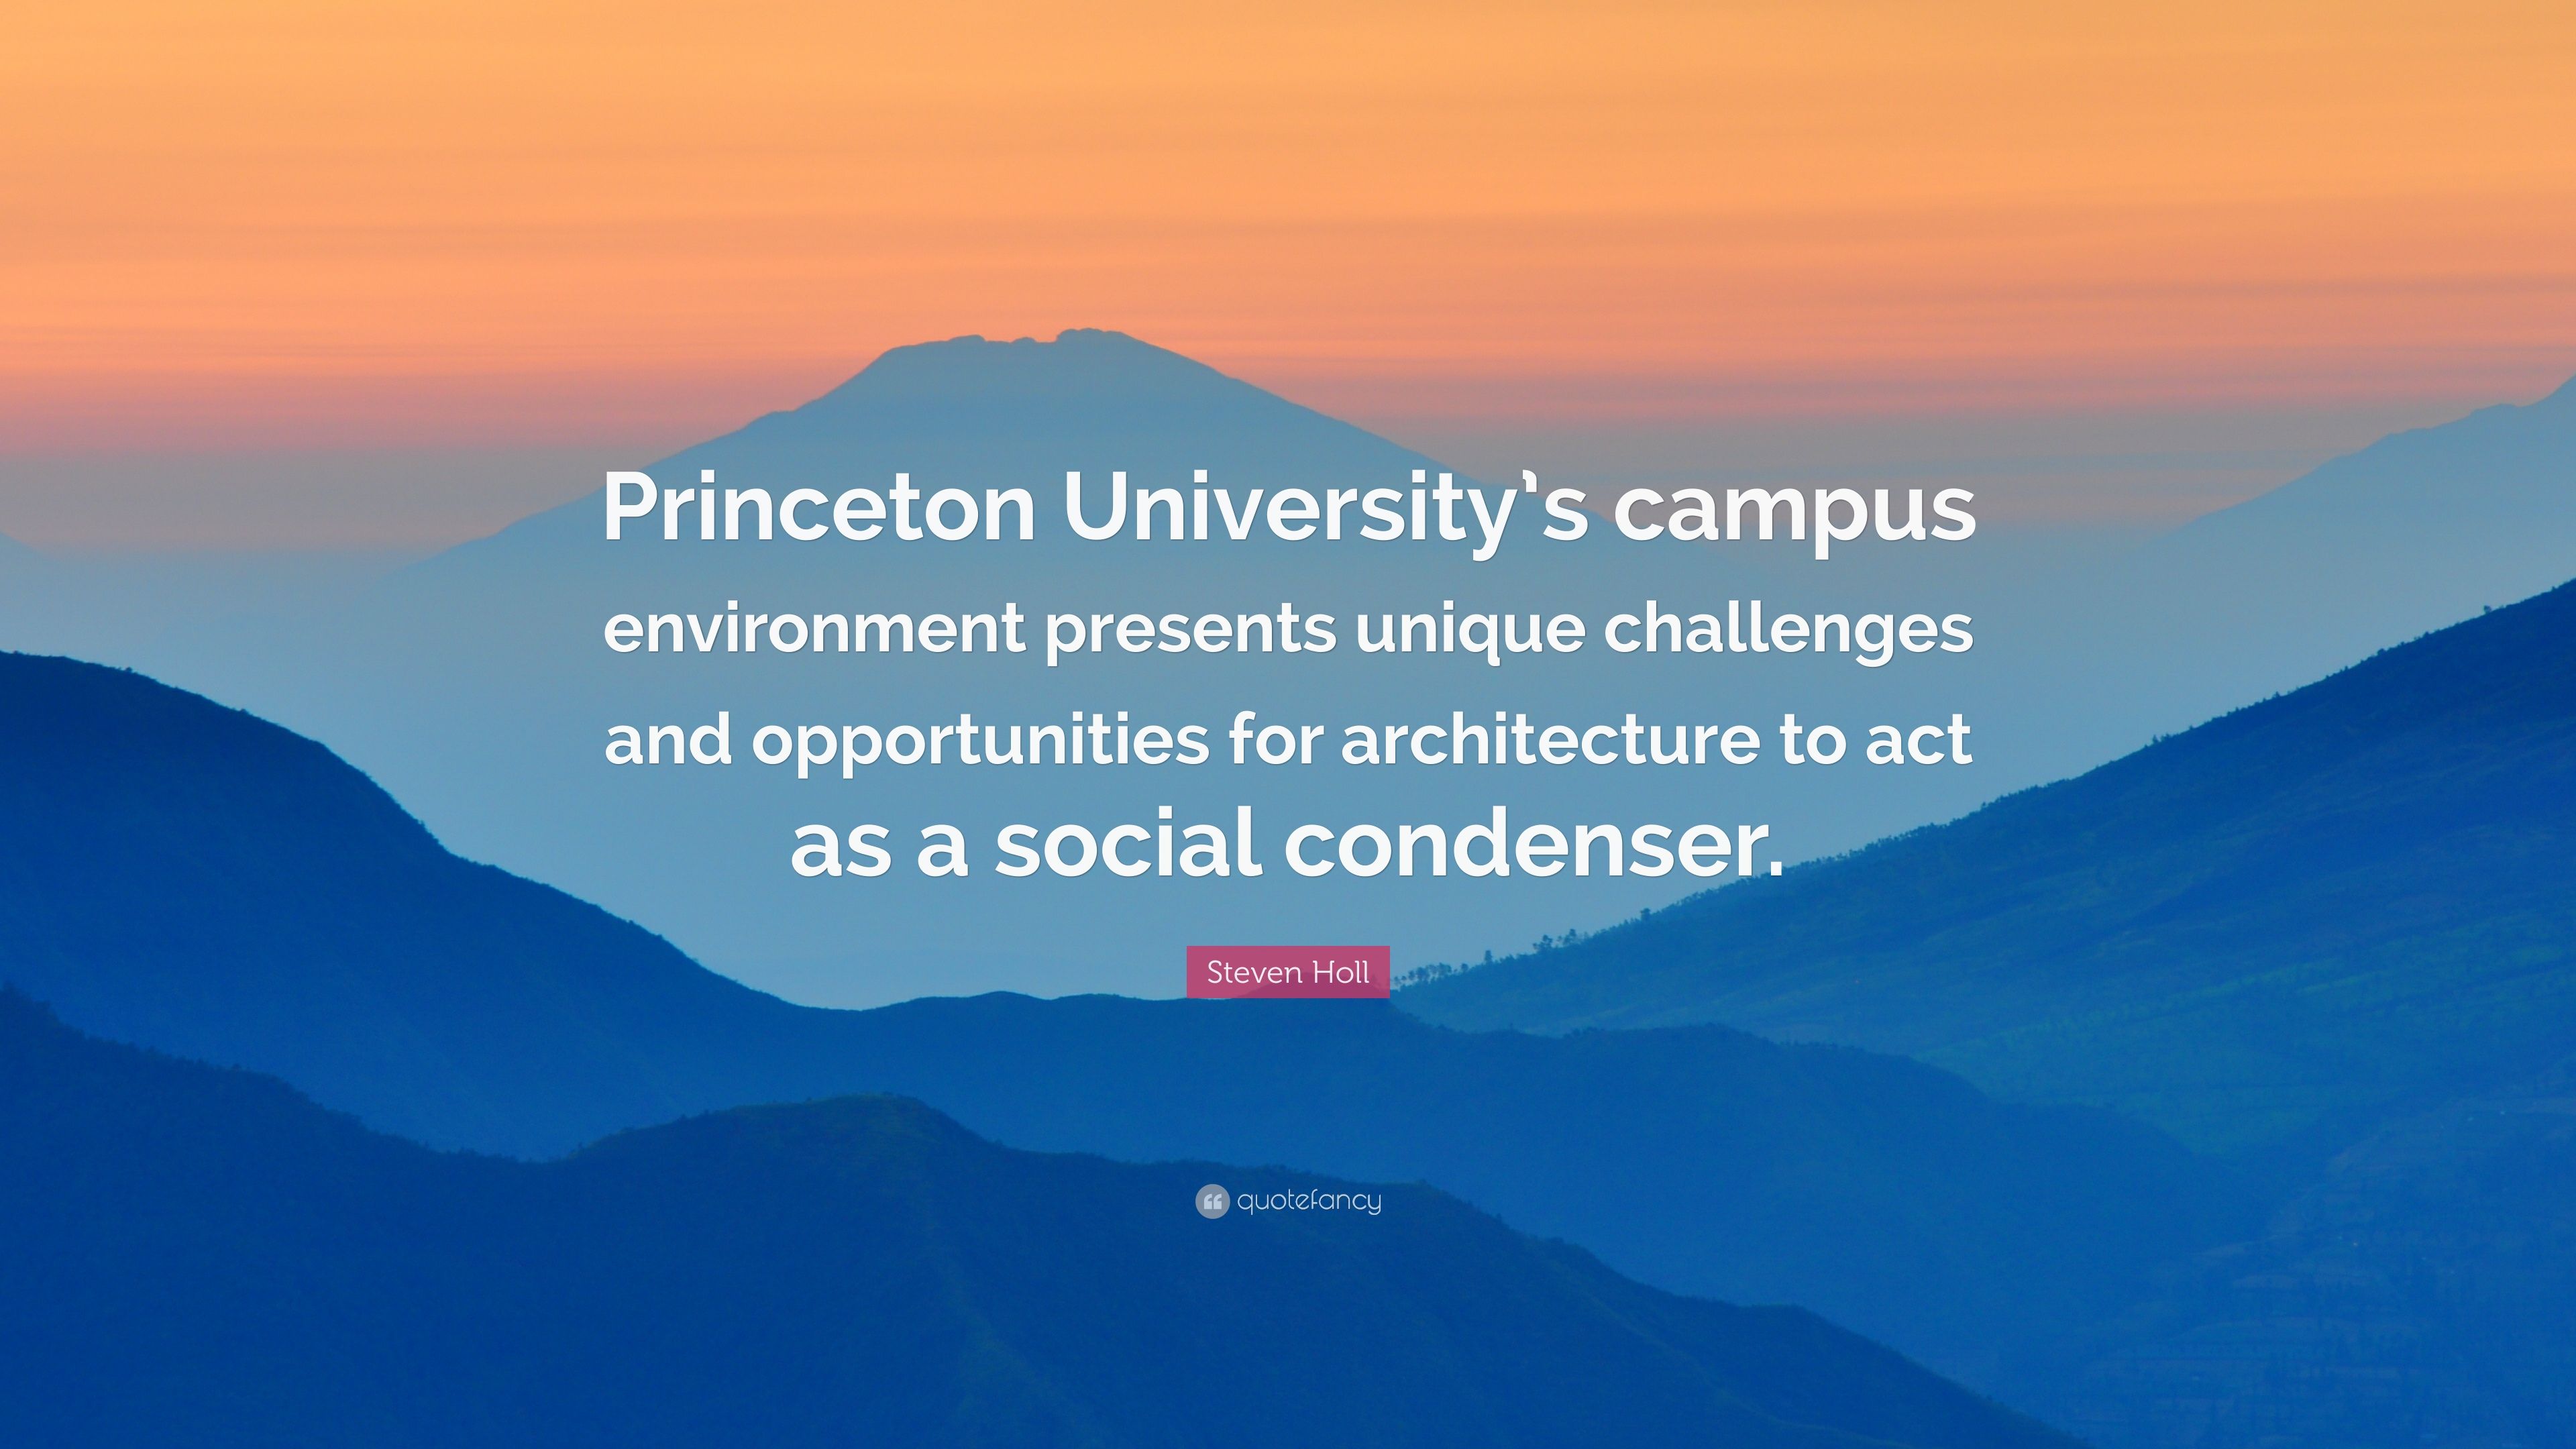 Steven Holl Quote: “Princeton University's campus environment presents unique challenges and opportunities for architecture to act as a soci.”